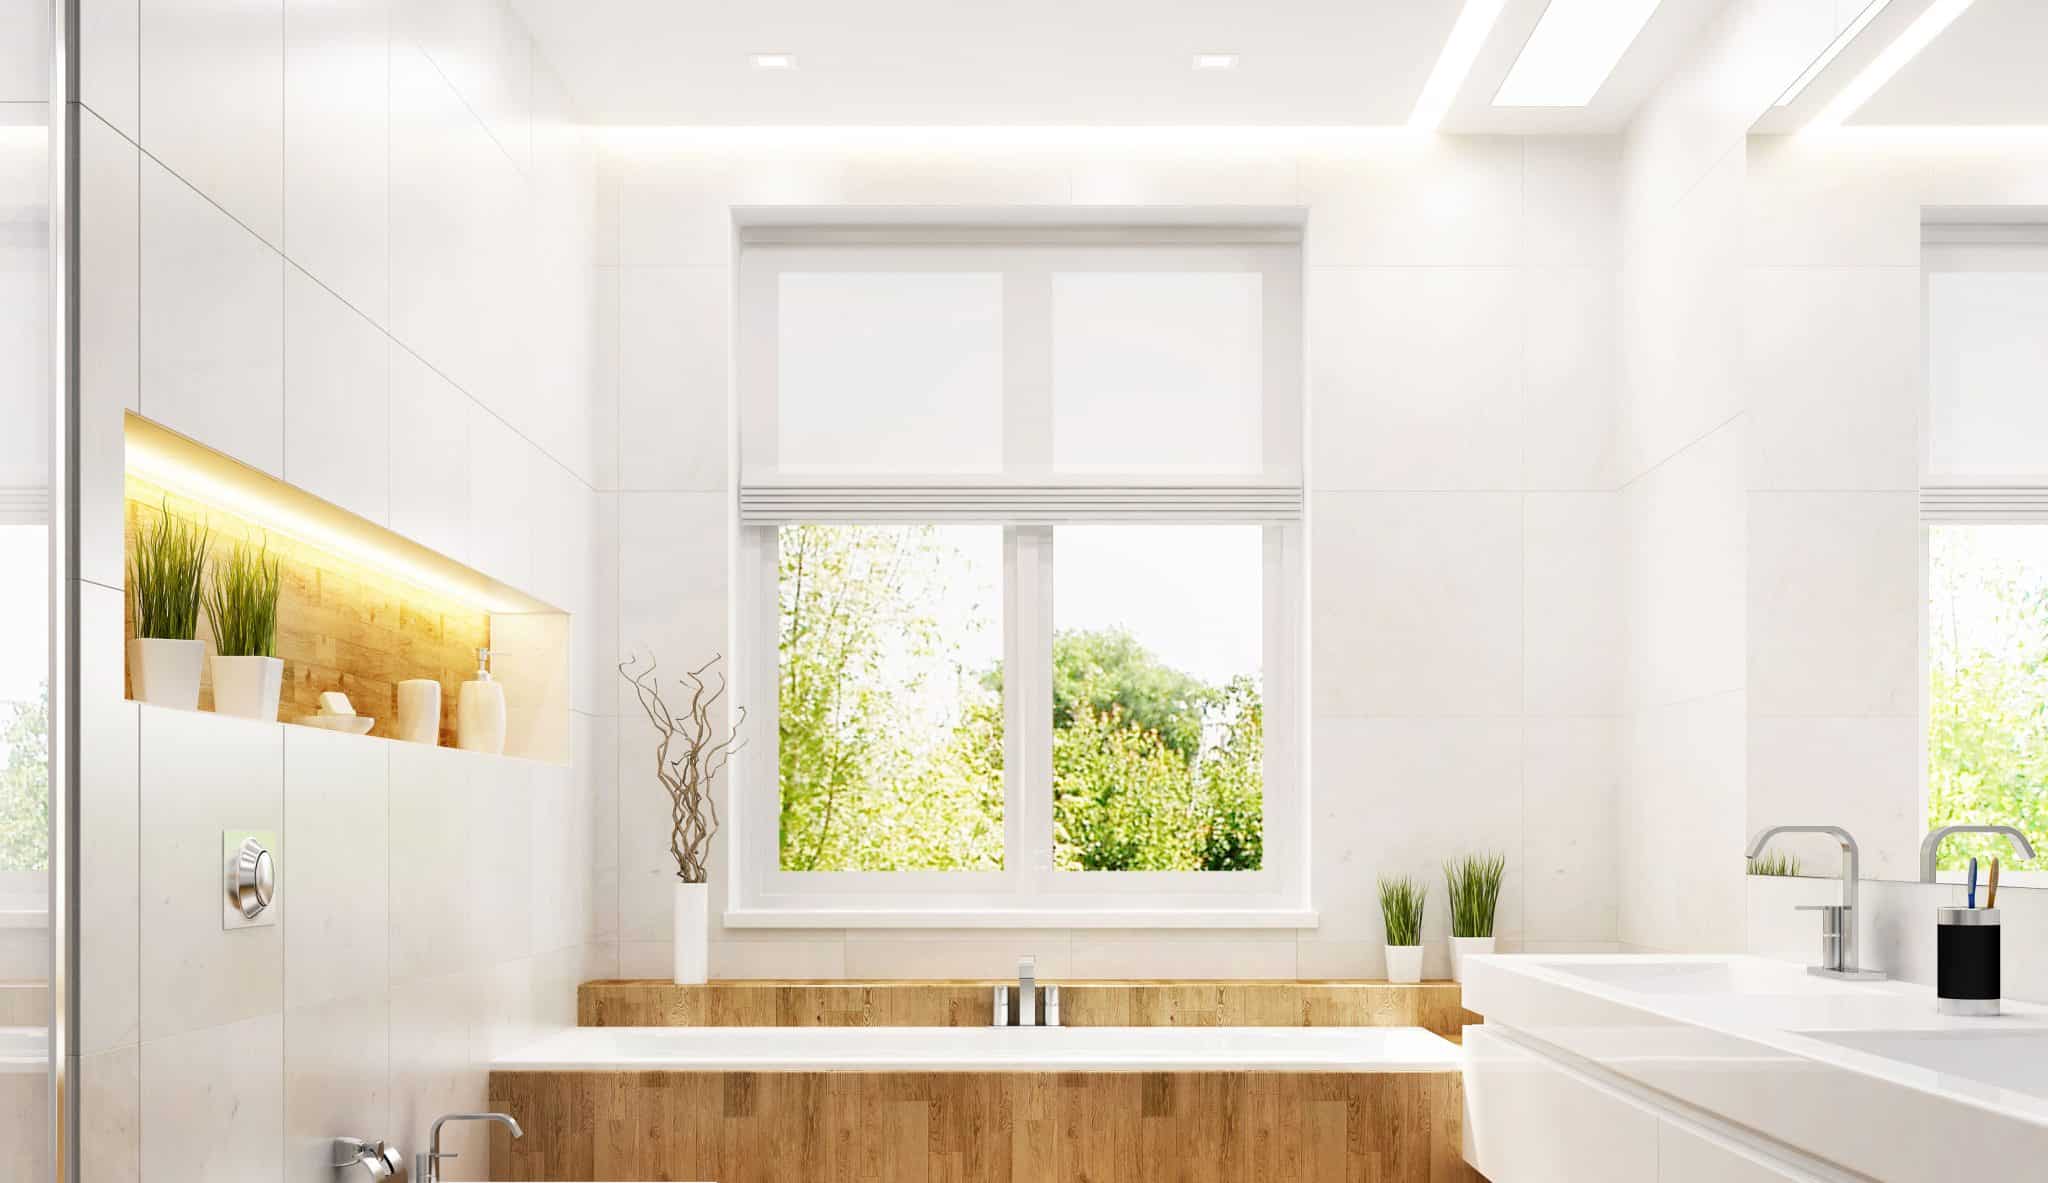 Bathroom With Wood Accents Casement Window Floating Toilet Accent Lighting Is 1 Scaled 